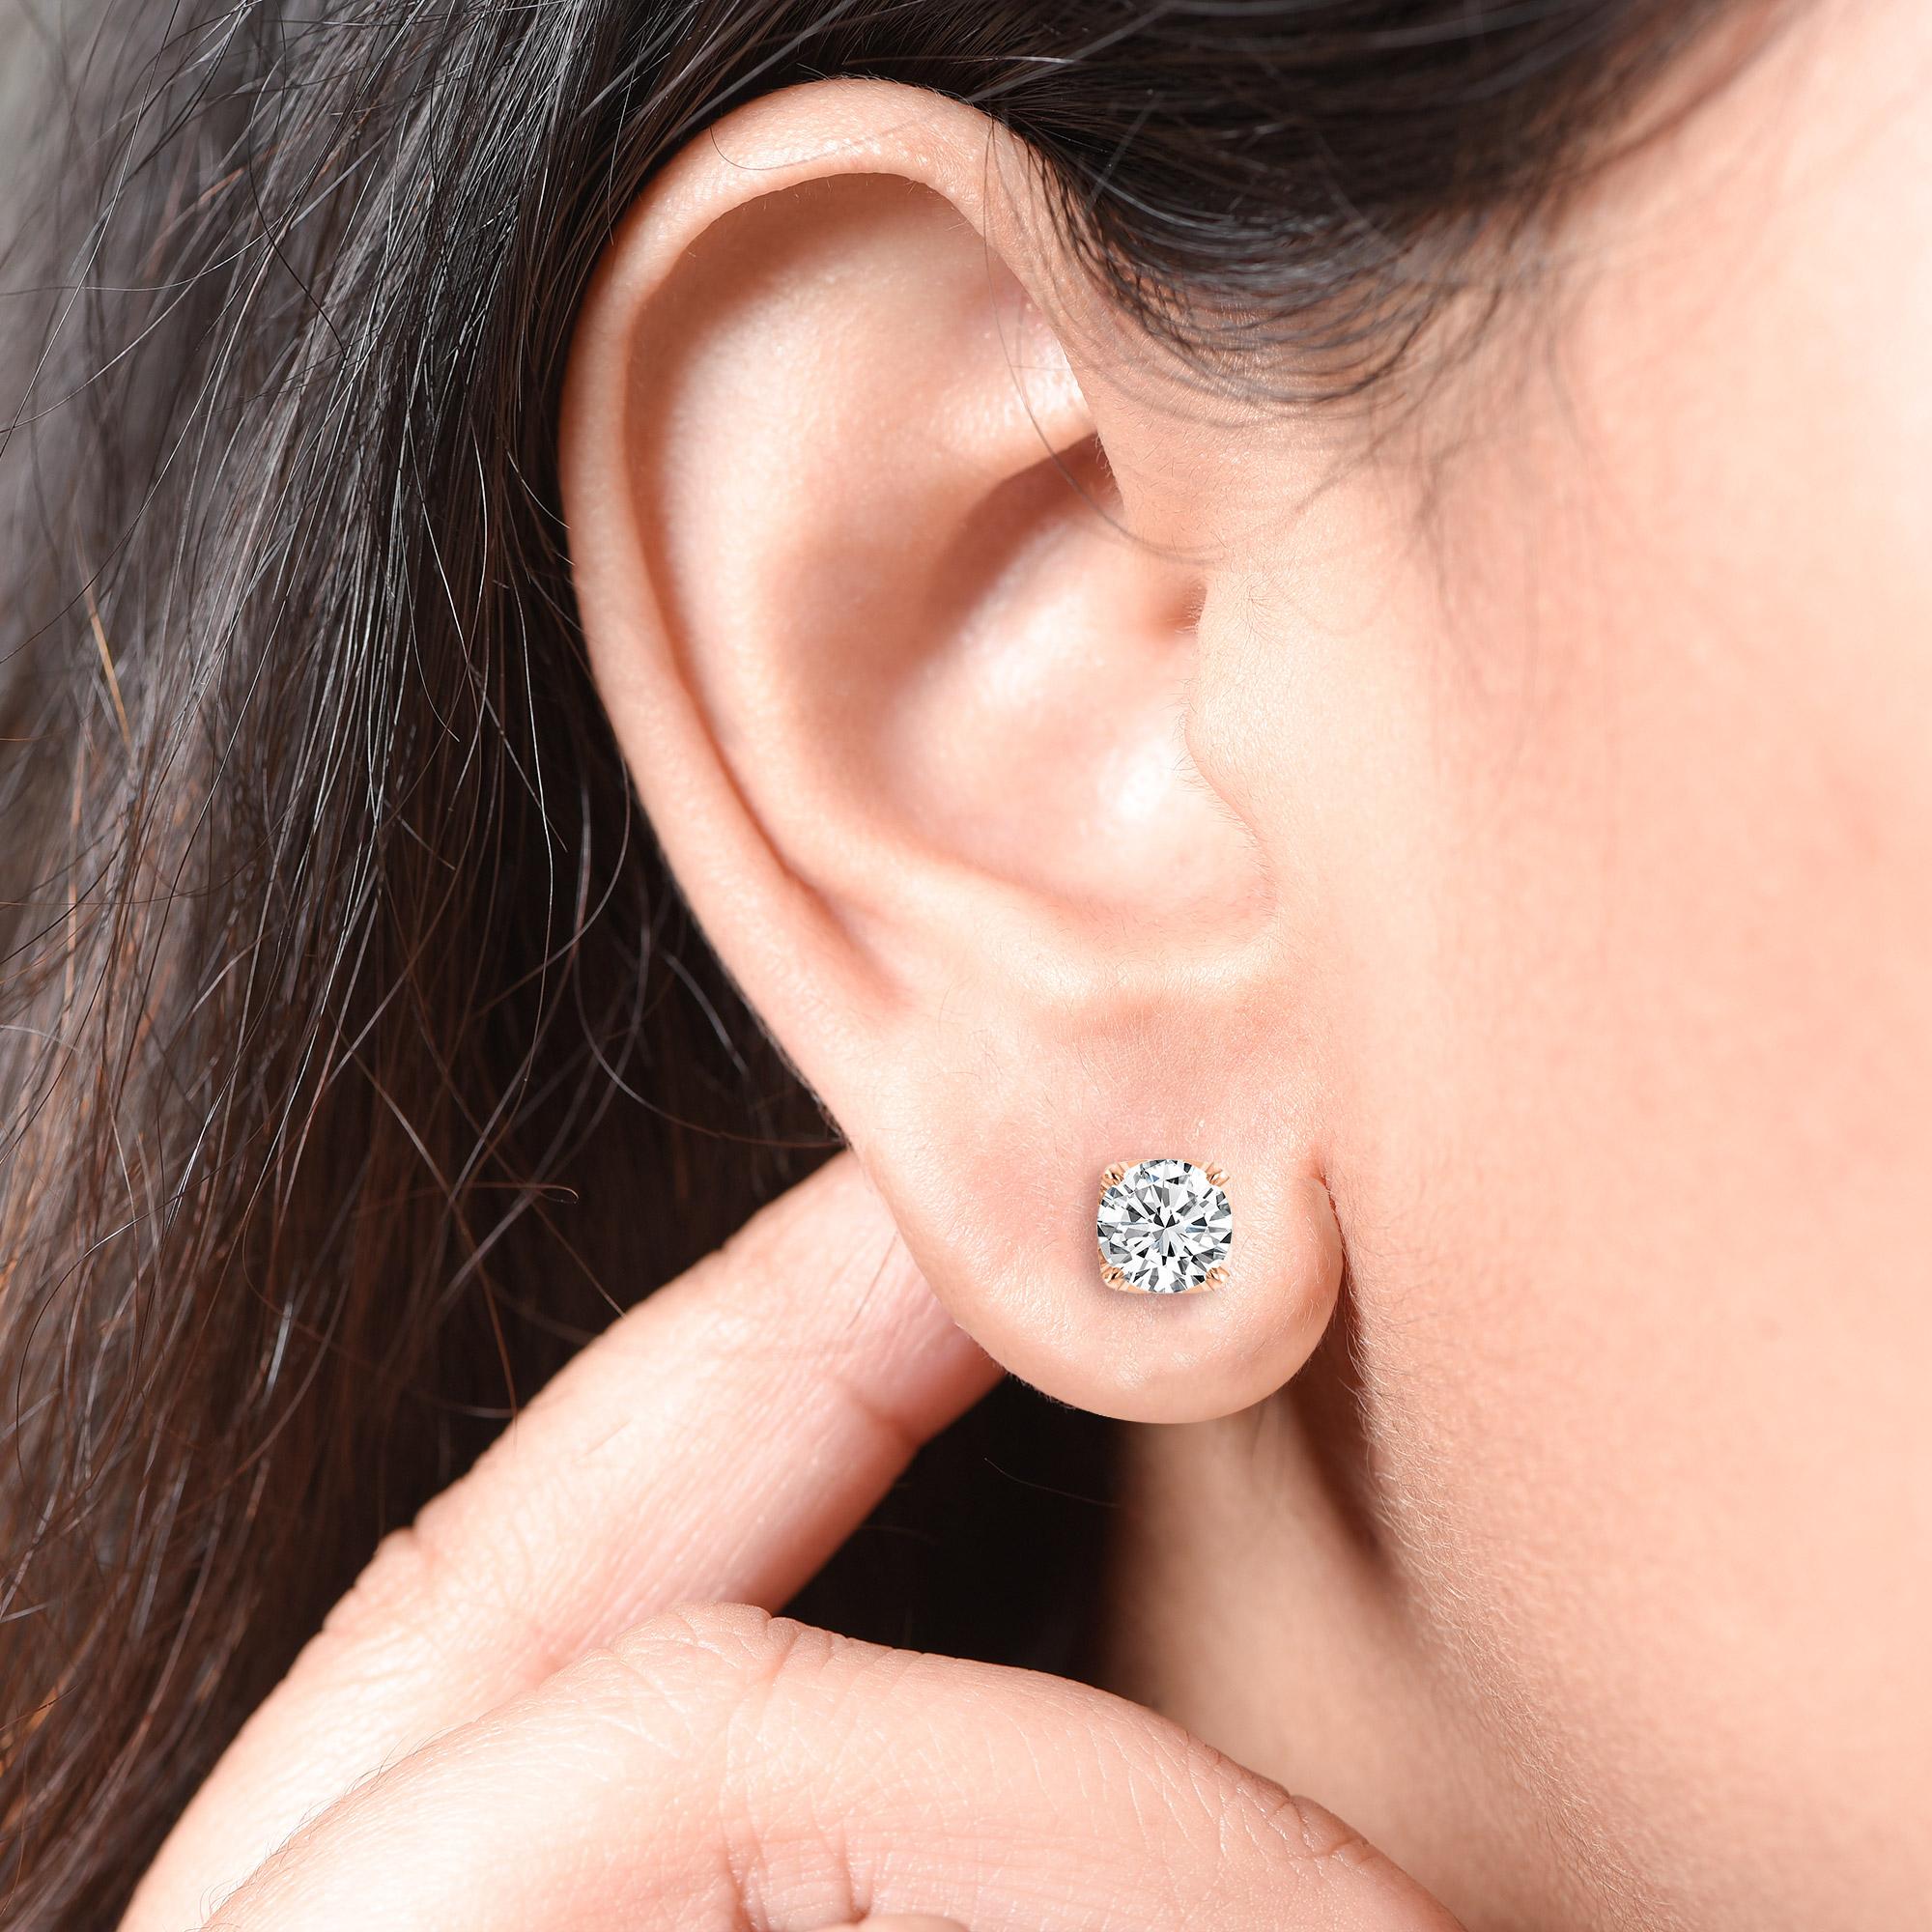 These GIA certified classic diamond studs showcase a pair of perfectly matched diamonds weighing total 1.00 carat. Crafted in 18-karat rose gold, these four prong earrings are available in yellow and white gold as well.

Perfect for gifting and for